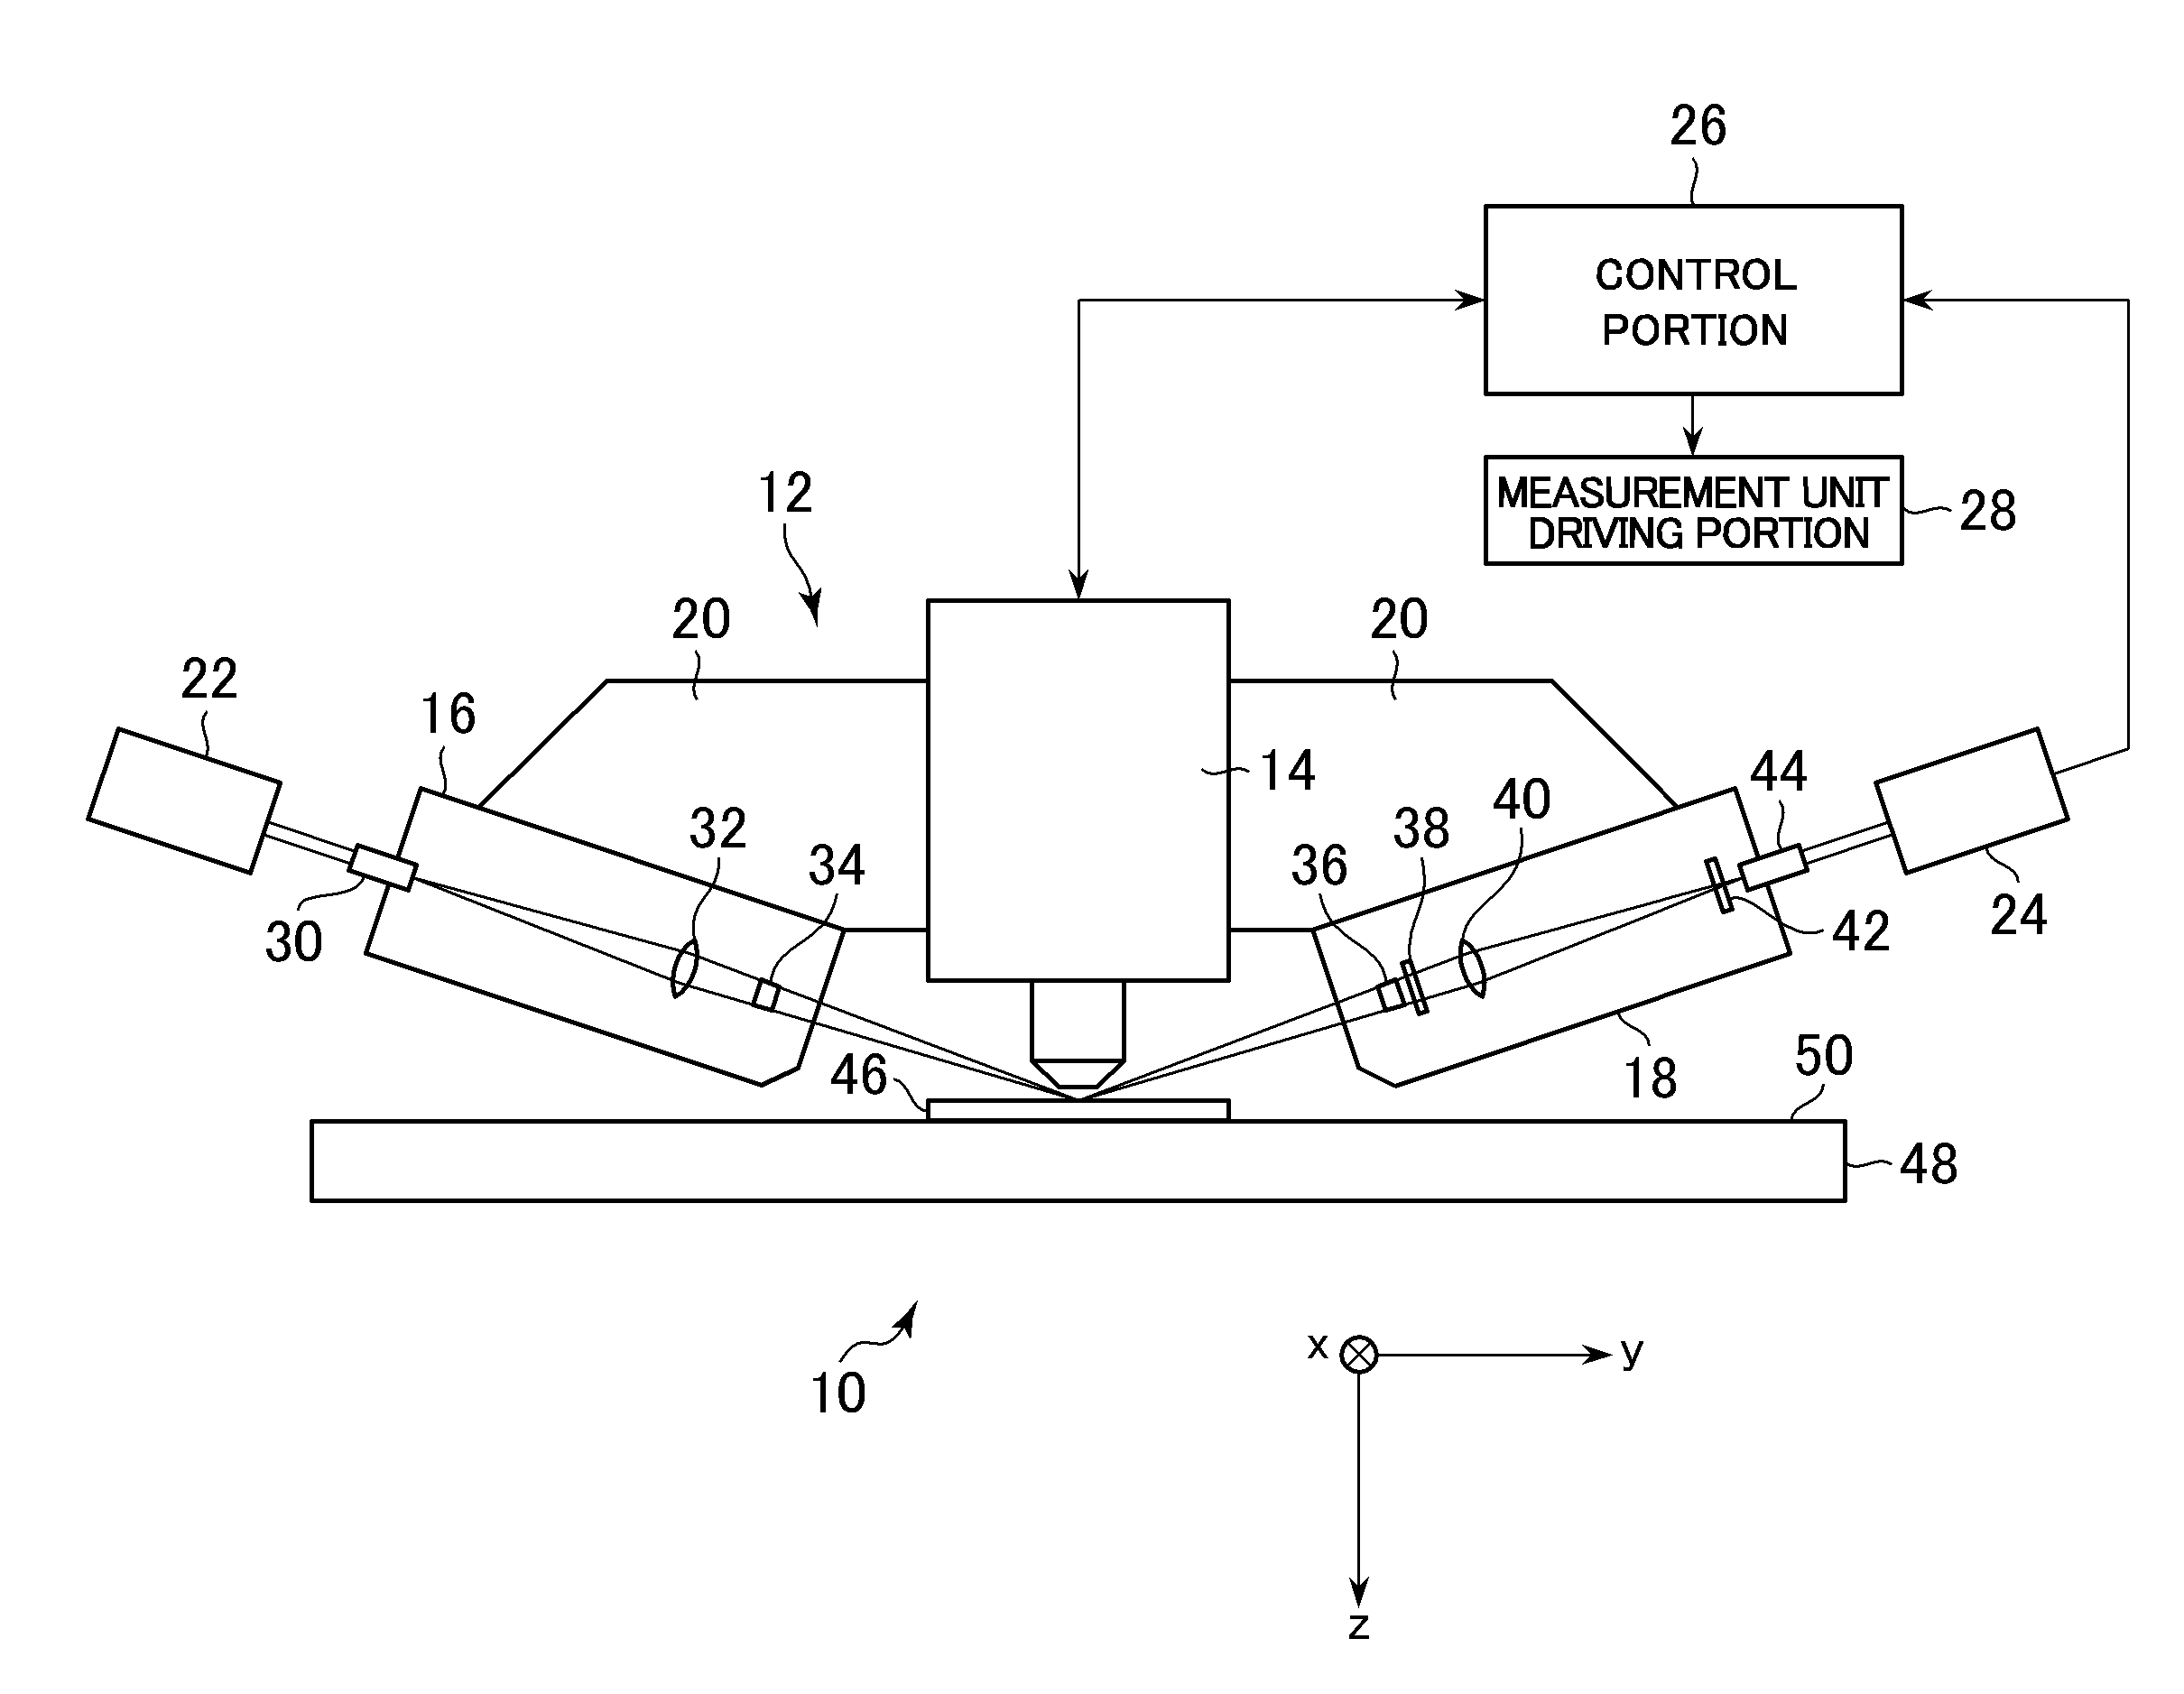 Film thickness measurement device and method